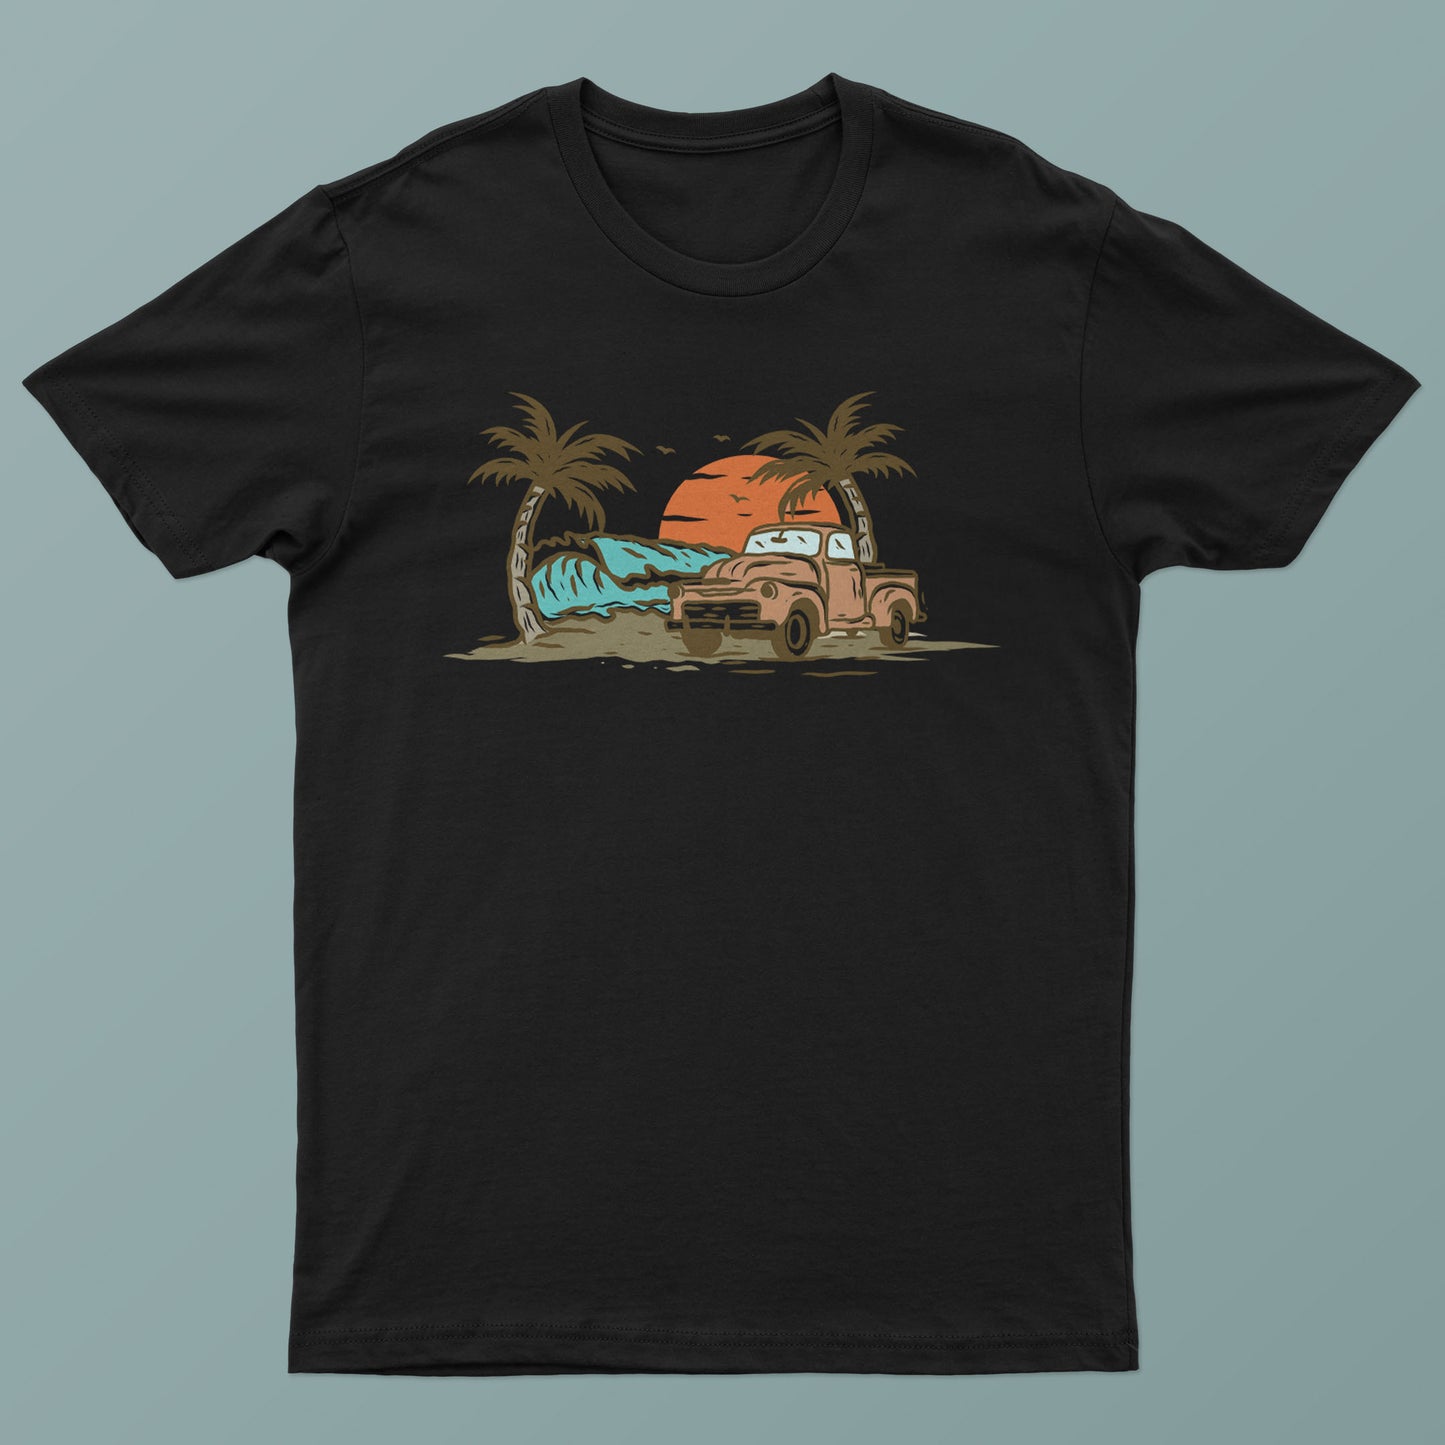 Vintage Car Beach Graphic Tee - S-XXXL, Various Colors, Free Shipping